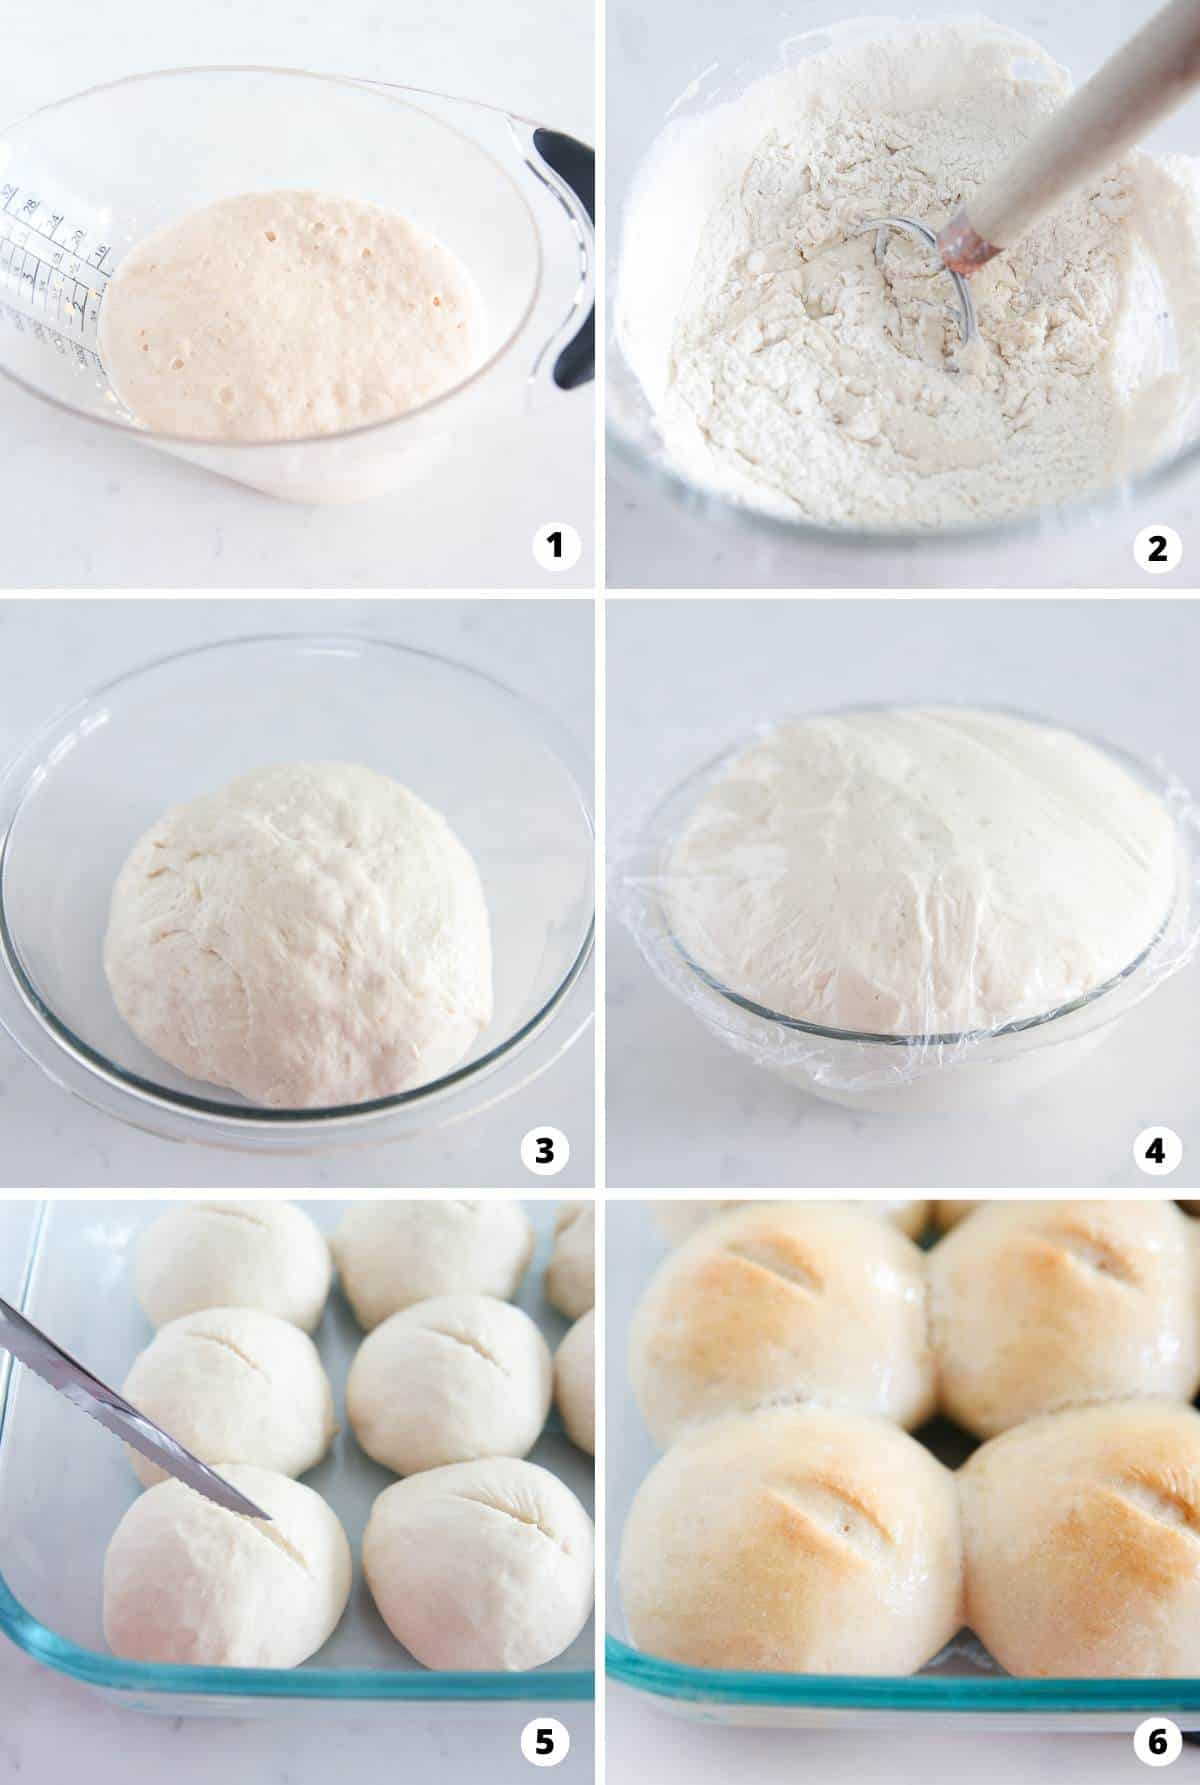 Showing how to make french bread rolls in a 6 step collage.